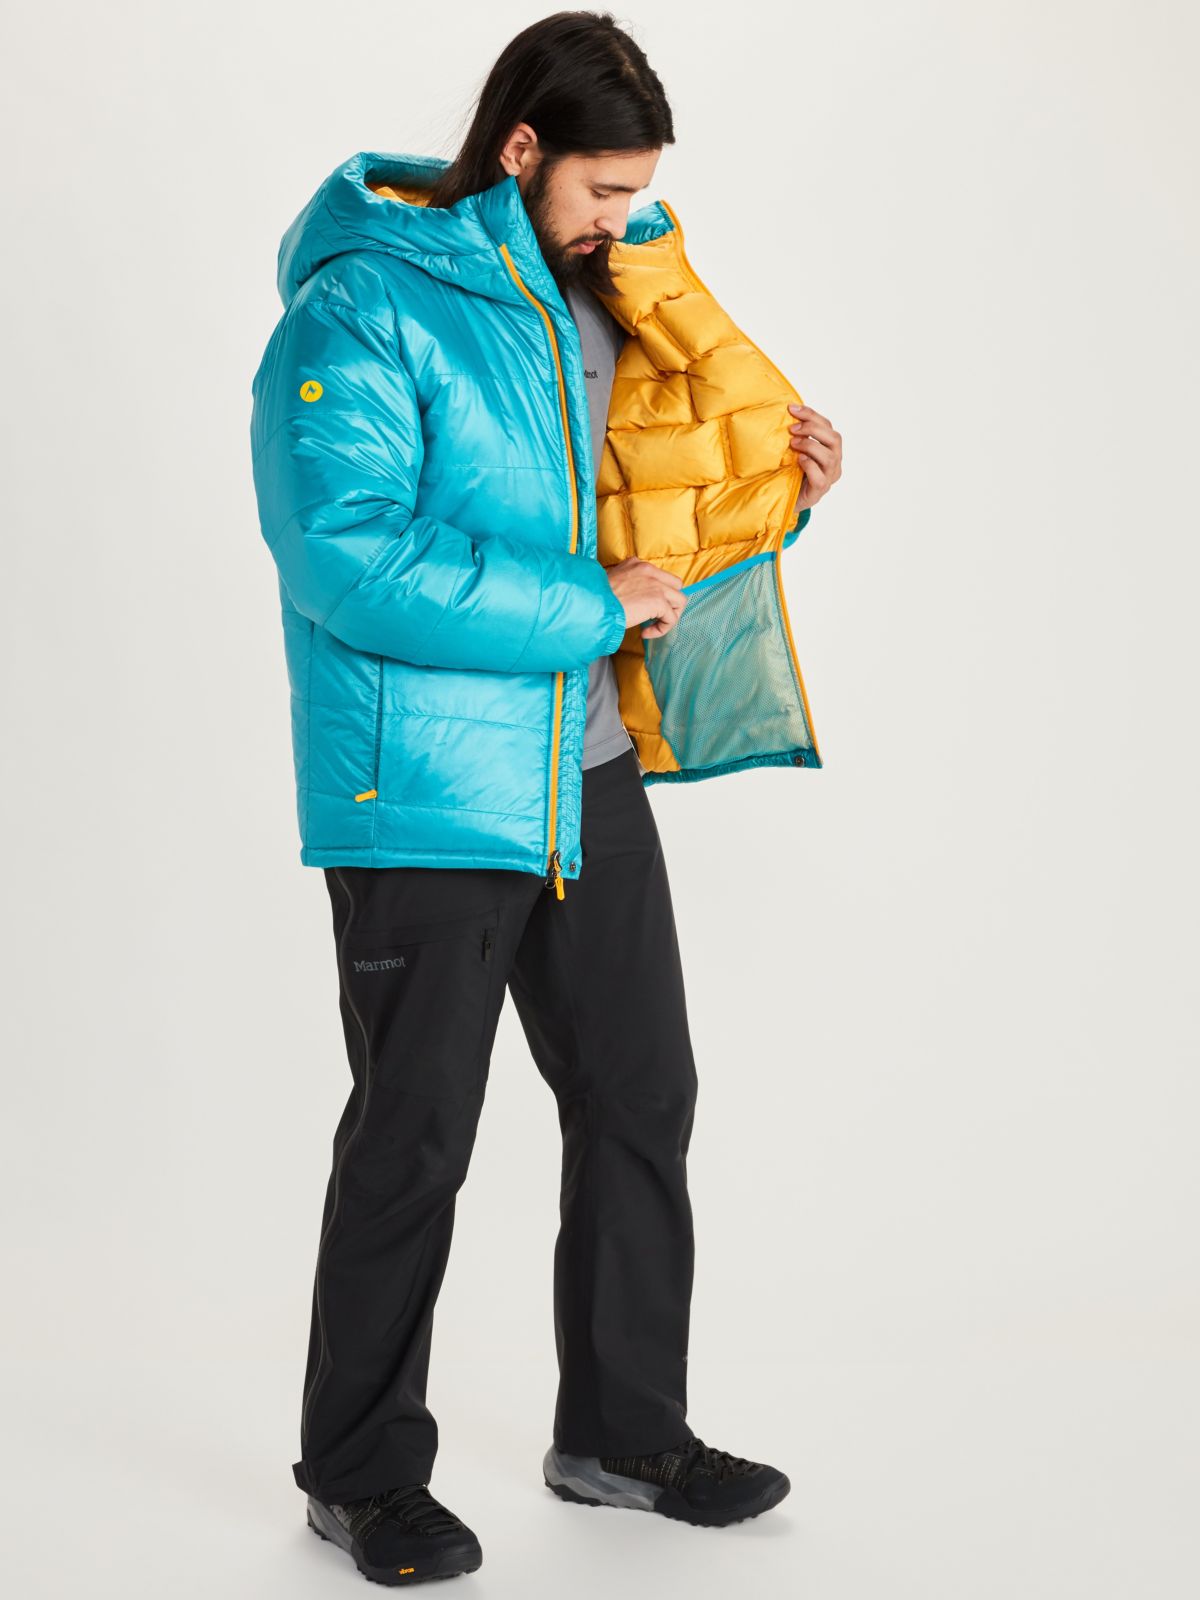 puffer jacket interior on male model side view